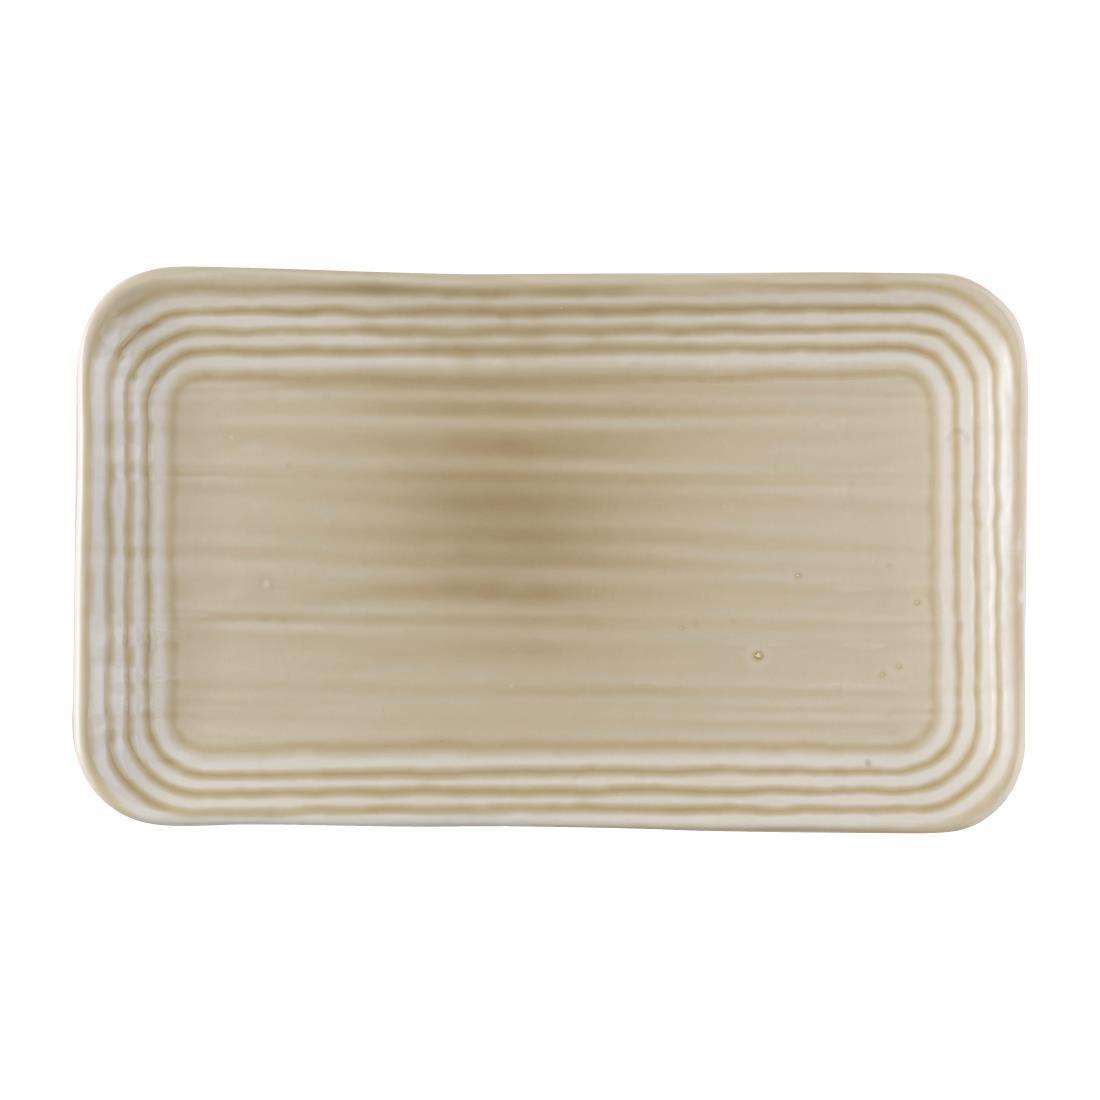 Dudson Harvest Norse Linen Organic Rect Plate 269x160mm (Pack of 12) - FS810  - 1